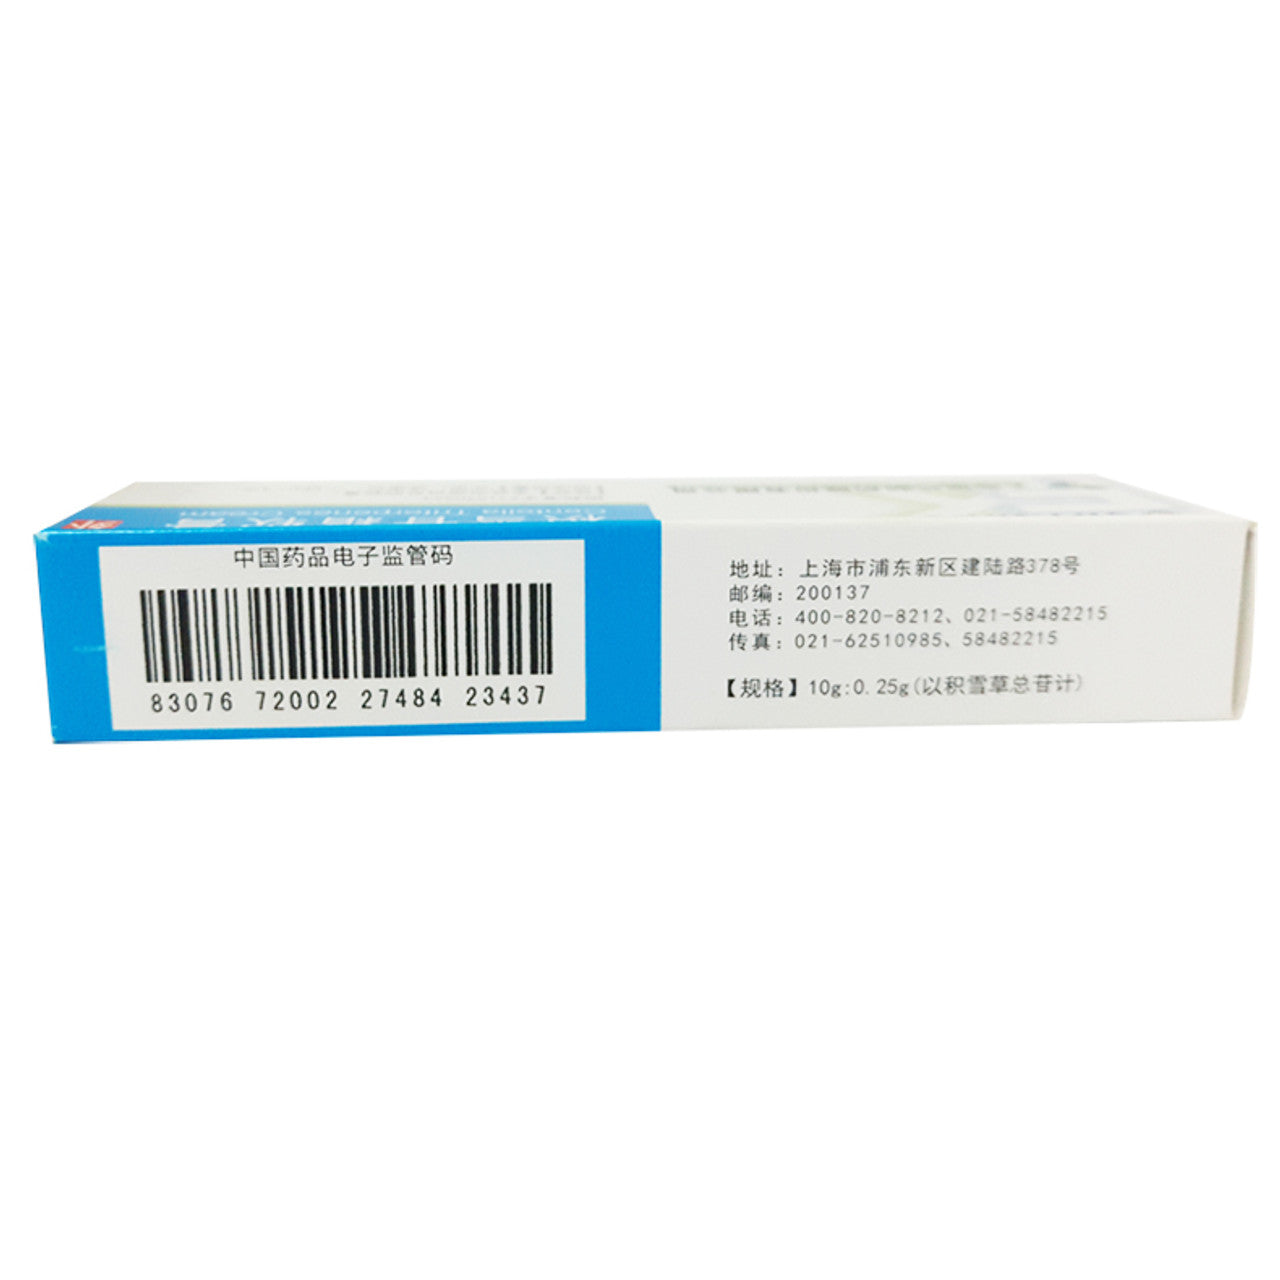 10g*5 boxes/lot. Centella Triterpenes Cream or Asiaticoside cream ointment or Jixuegan Shuang Ruangao For Burn Wound